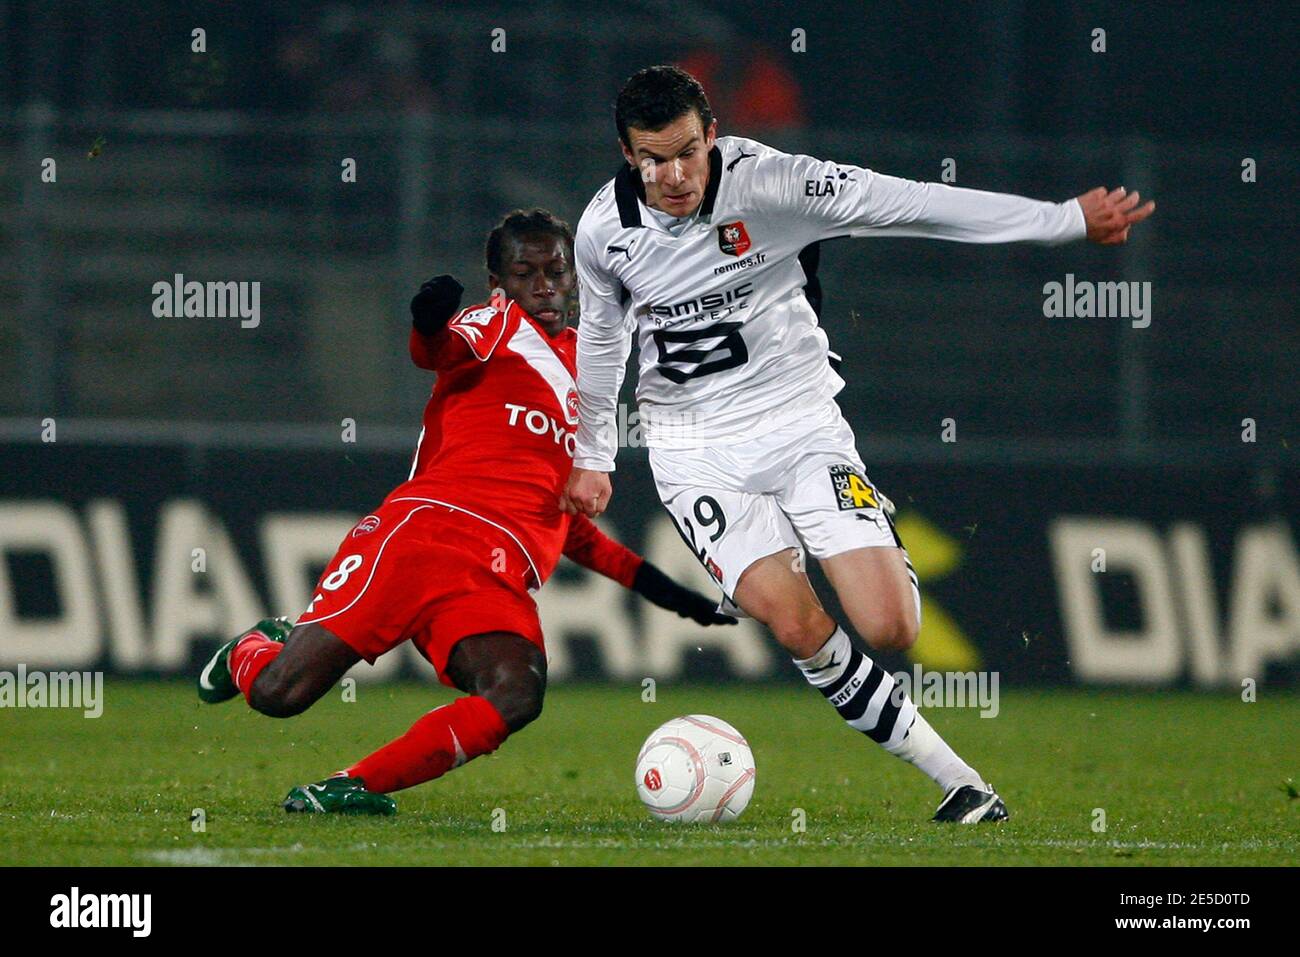 Valenciennes' Amara Karba Bangoura and Rennes' Romain Danze during the French First League Soccer match, Valenciennes vs Rennes at the Nungesser Stadium in Valenciennes, France on October 29, 2008. The match ended in a 0-0 draw. Photo by Mickael Libert/Ca Stock Photo